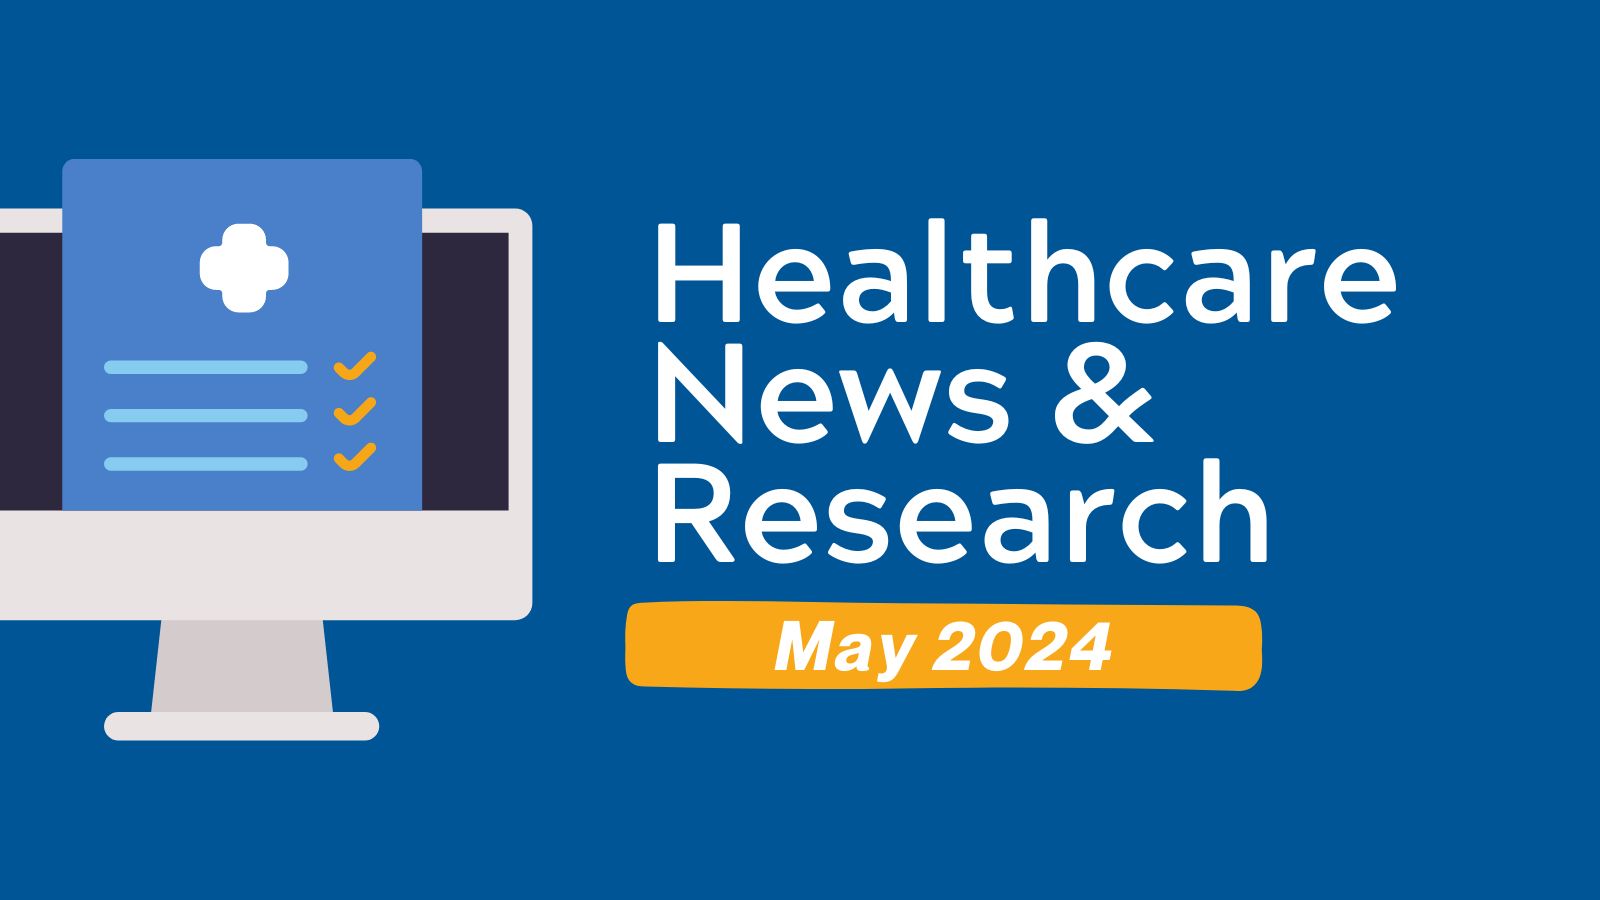 Healthcare News & Research - May 2024